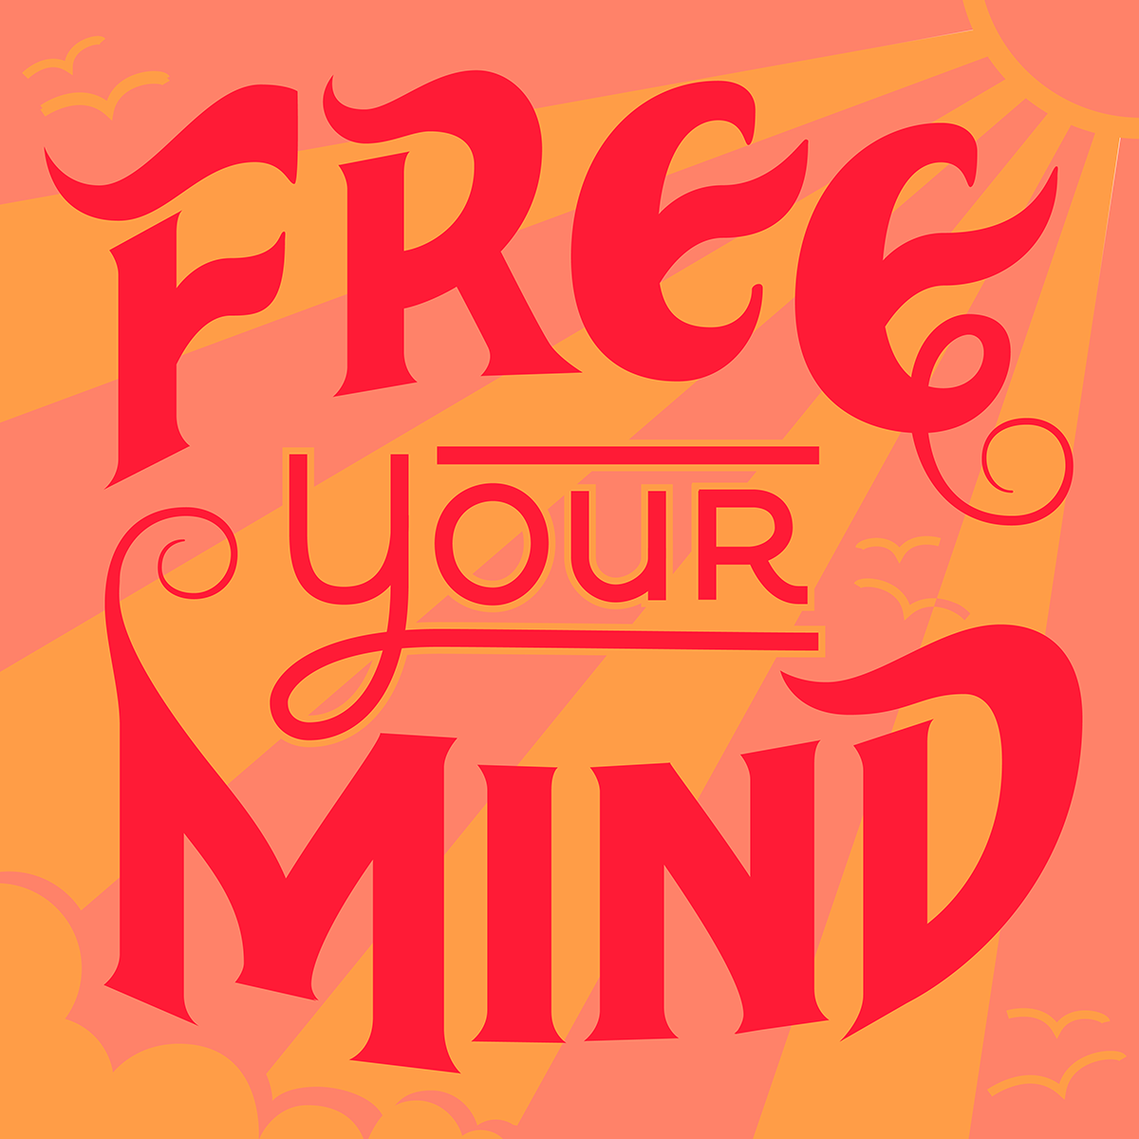 “Free Your Mind” psychedelic vintage lettering with sun, sun rays, birds, and clouds in pink and yellow.